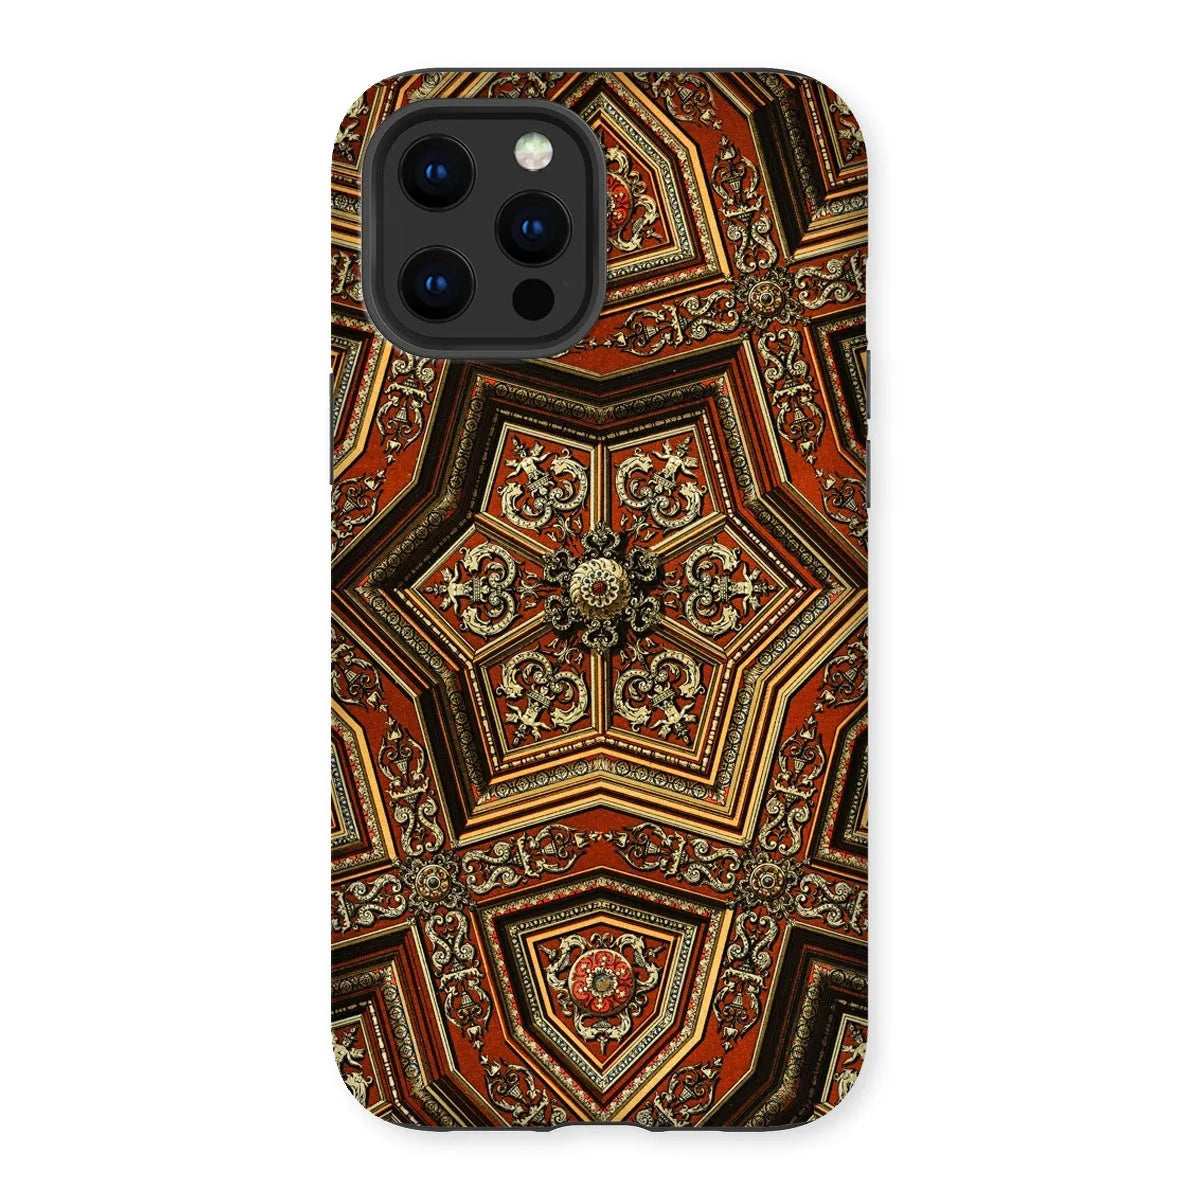 Renaissance Pattern By Auguste Racinet Tough Phone Case - Iphone 12 Pro Max / Gloss - Mobile Phone Cases - Aesthetic Art